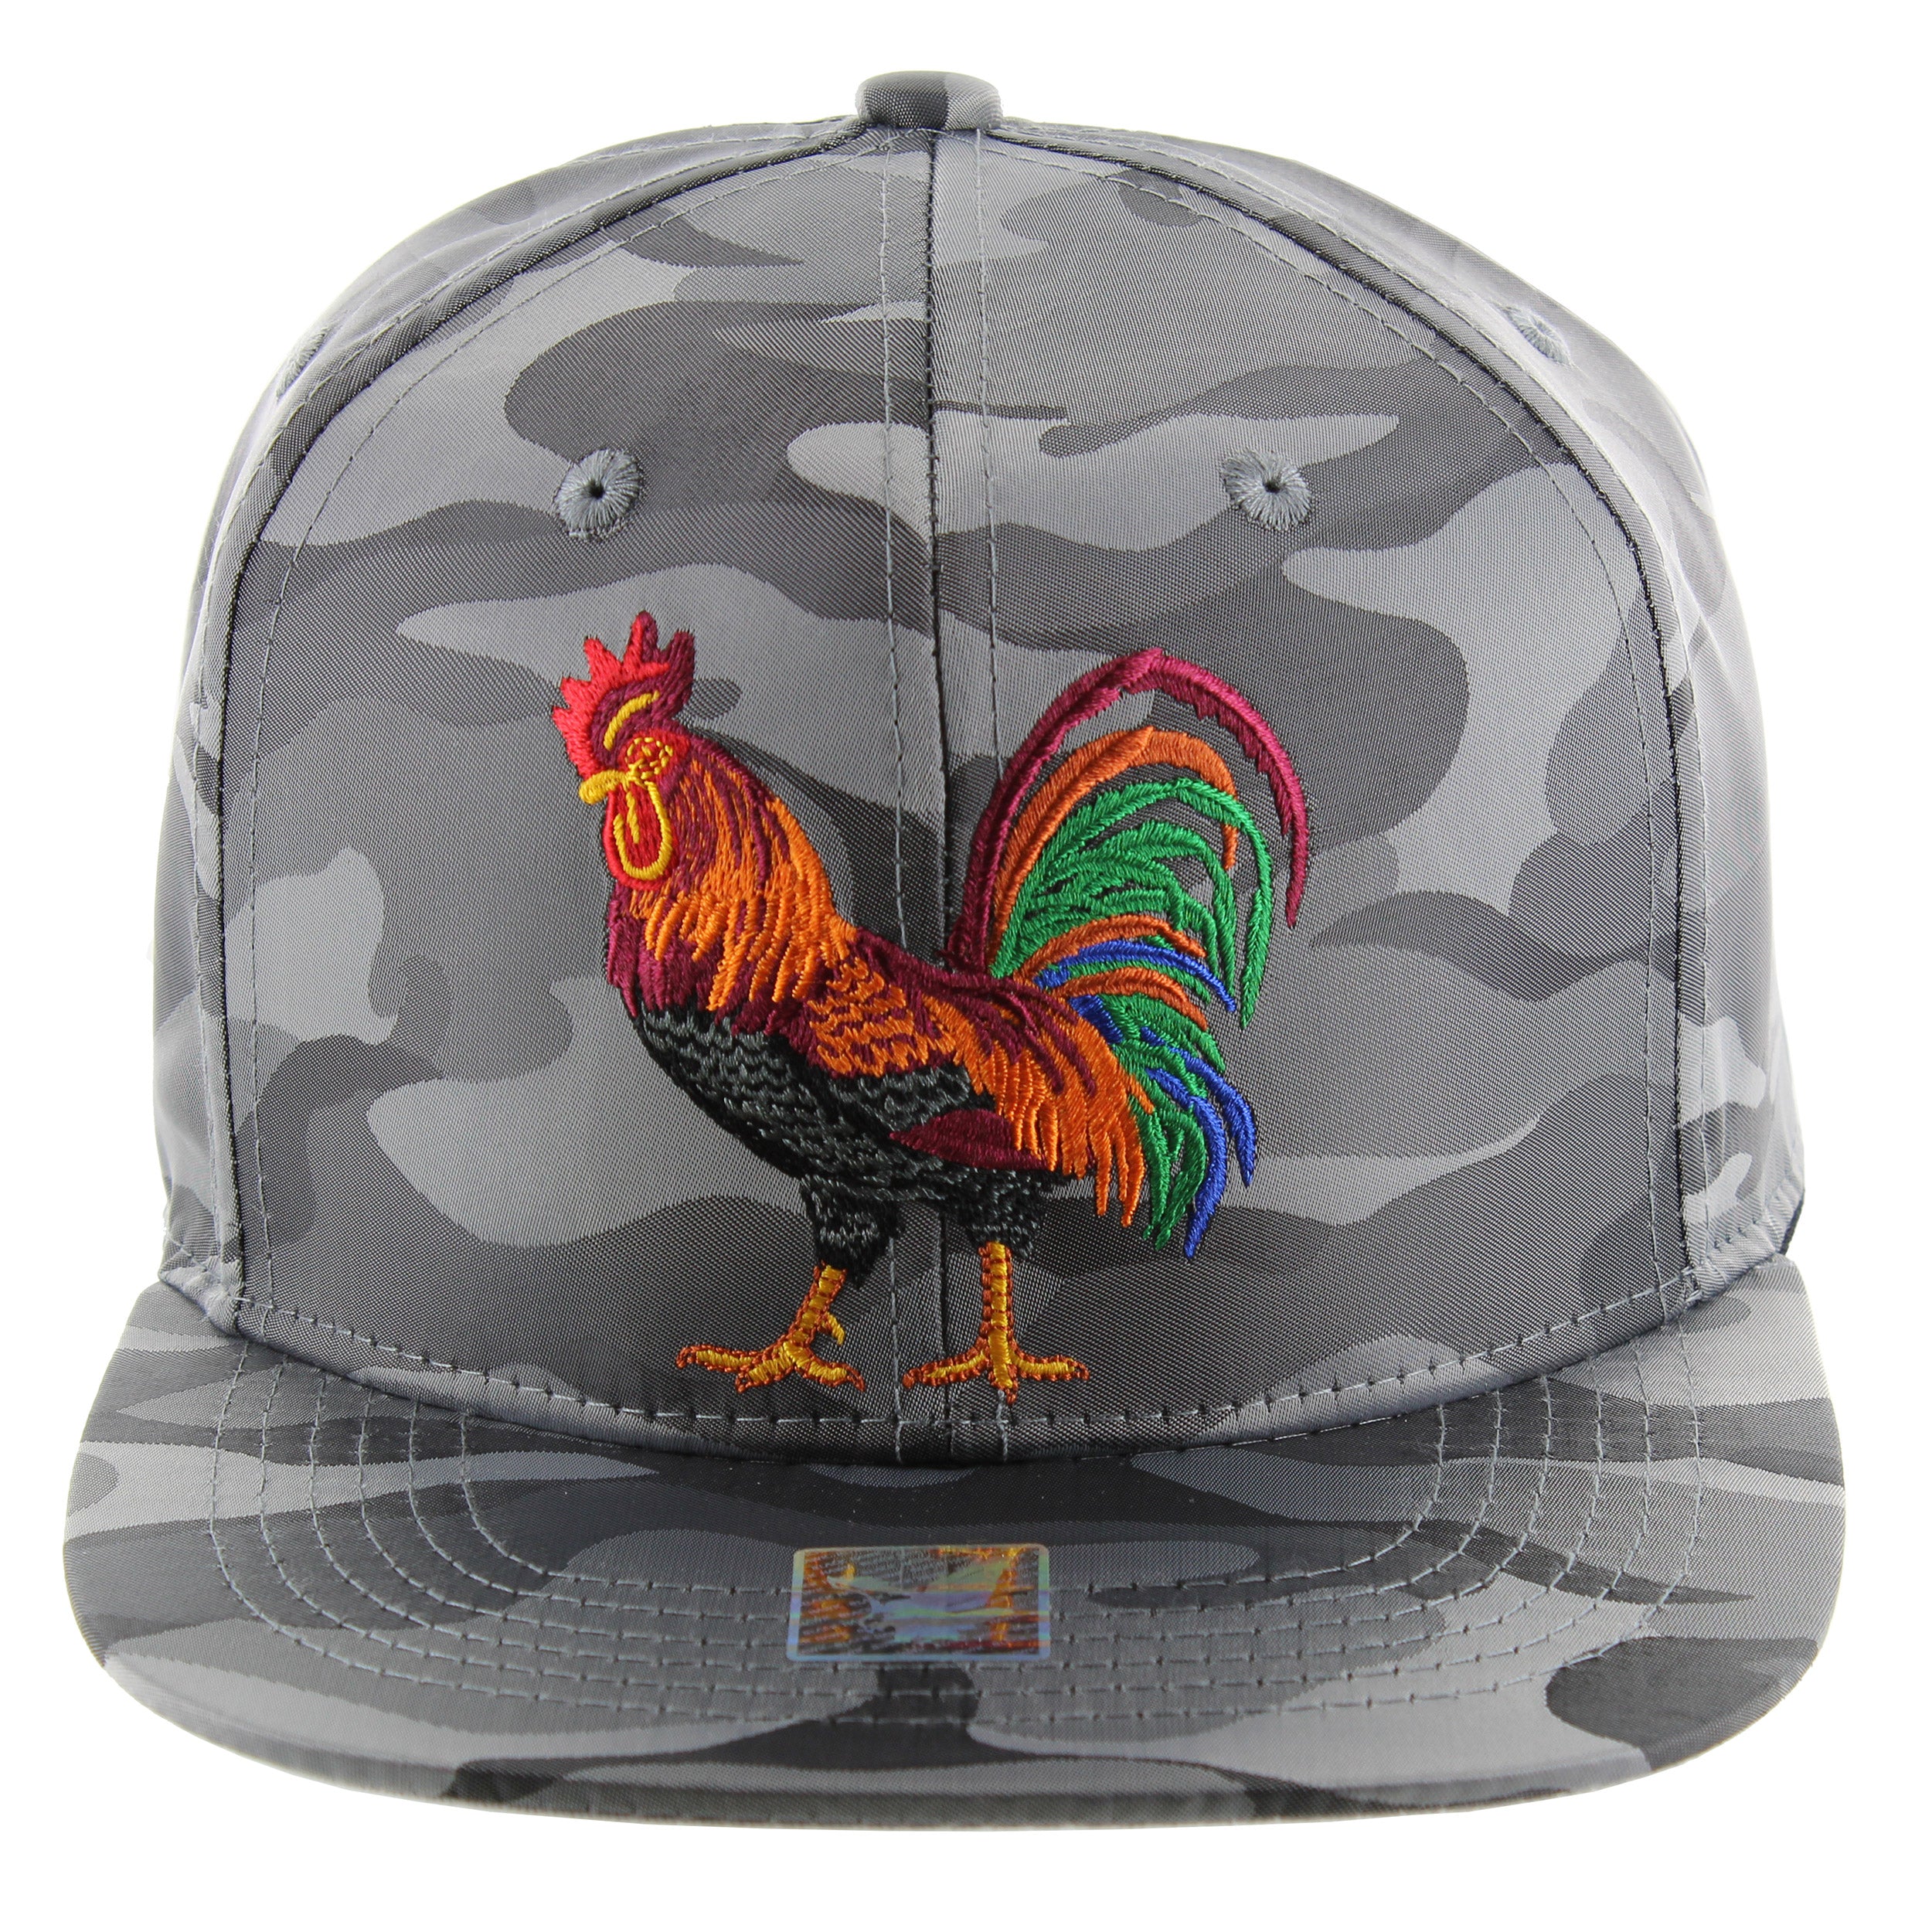 Rooster Embroidered 3d Camo Cap - LA7 ONLINE One Size